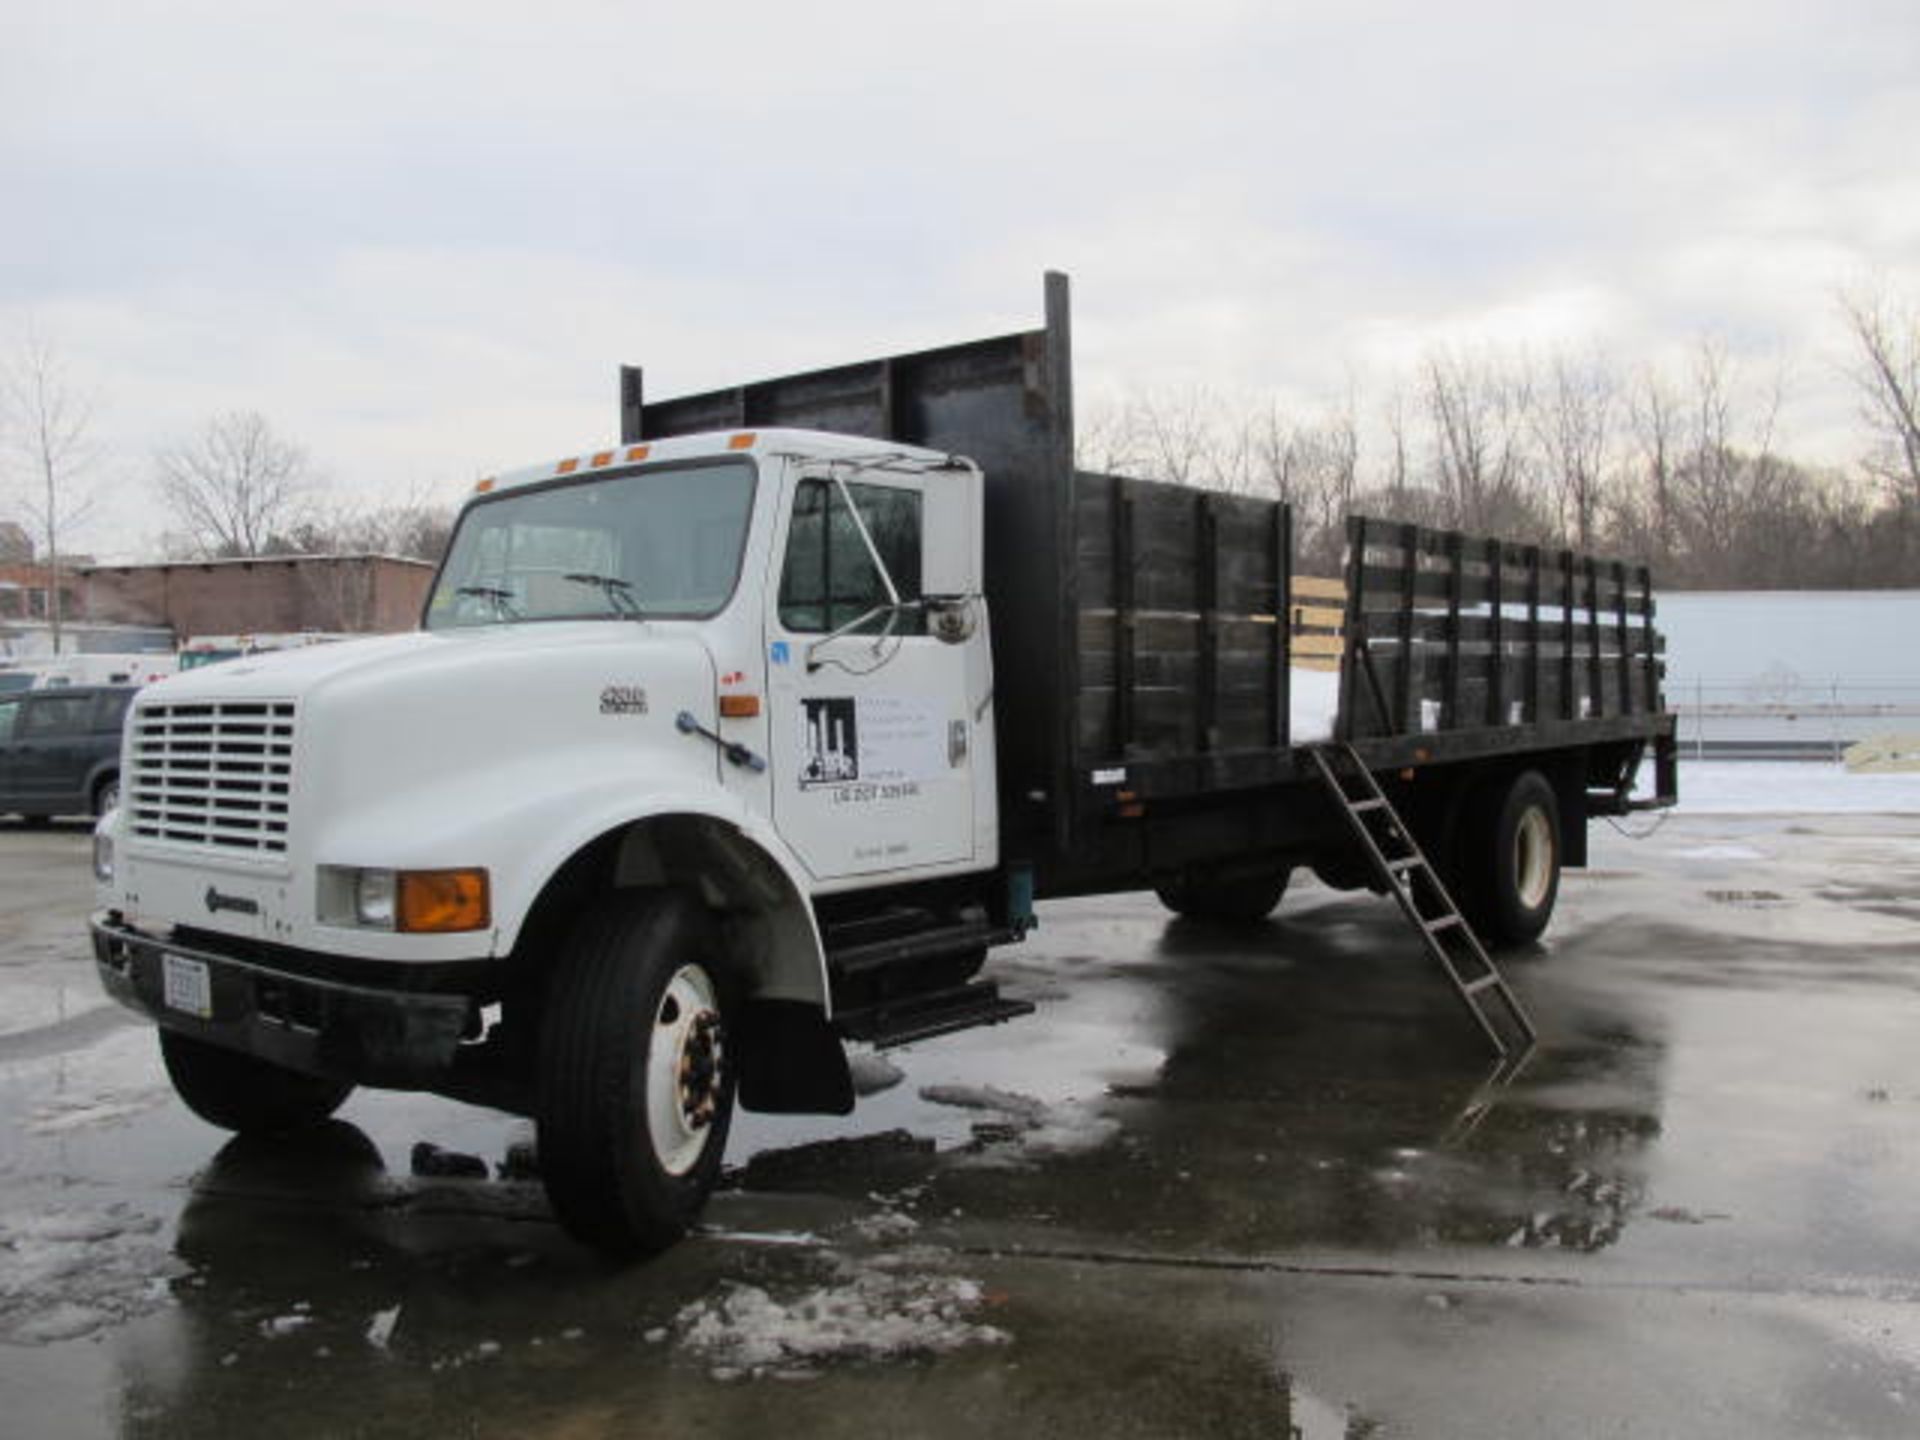 1998 International 4900 DT466E 4x2 Stake Body Truck VIN: 1HTSCAAN2W510458 6+ Plus Transmission, - Image 3 of 9